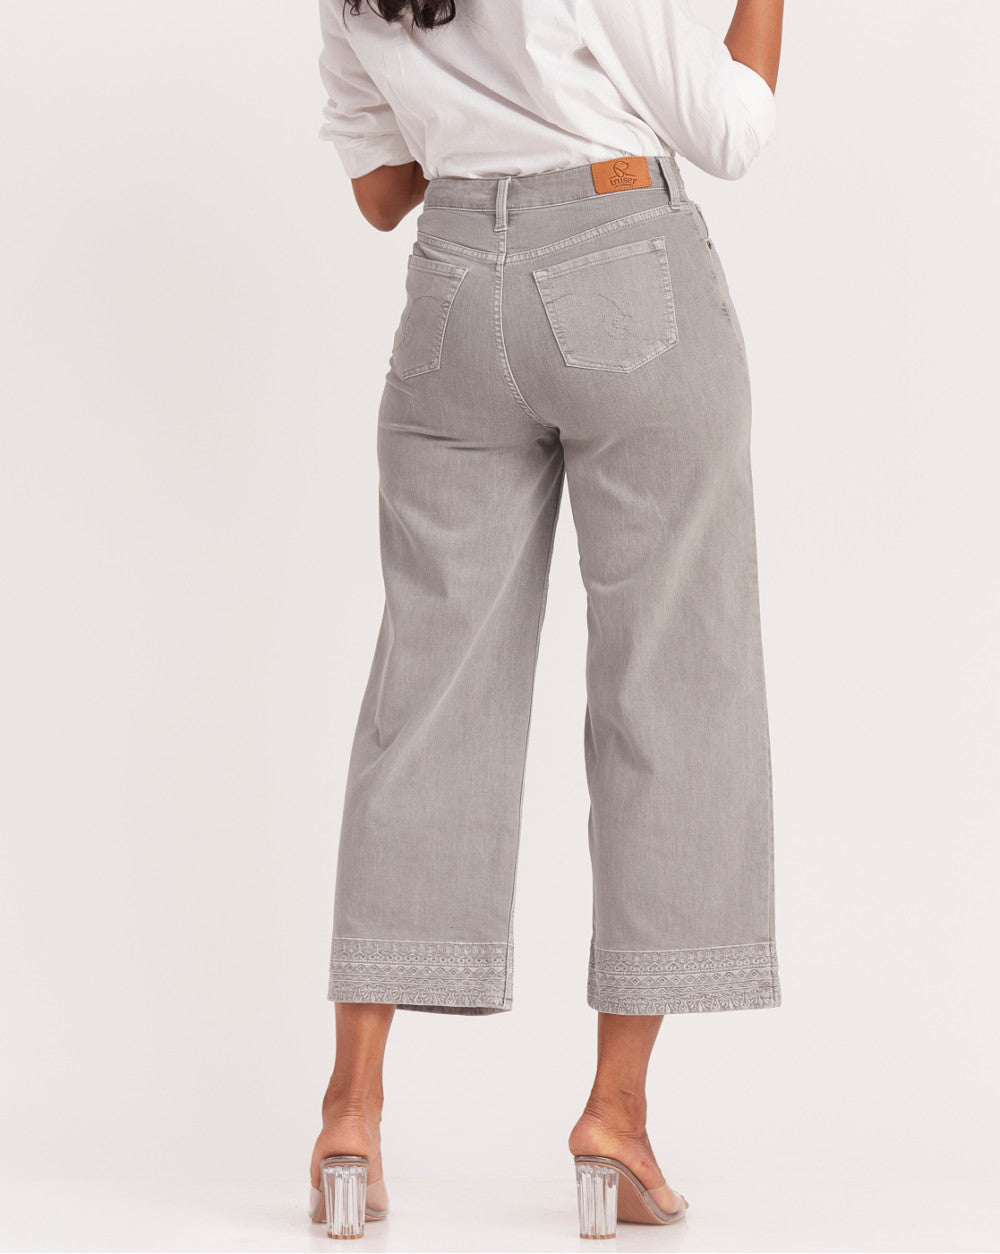 Wide Leg High Waist Boho Embroidered Colored Jeans - Soft Grey